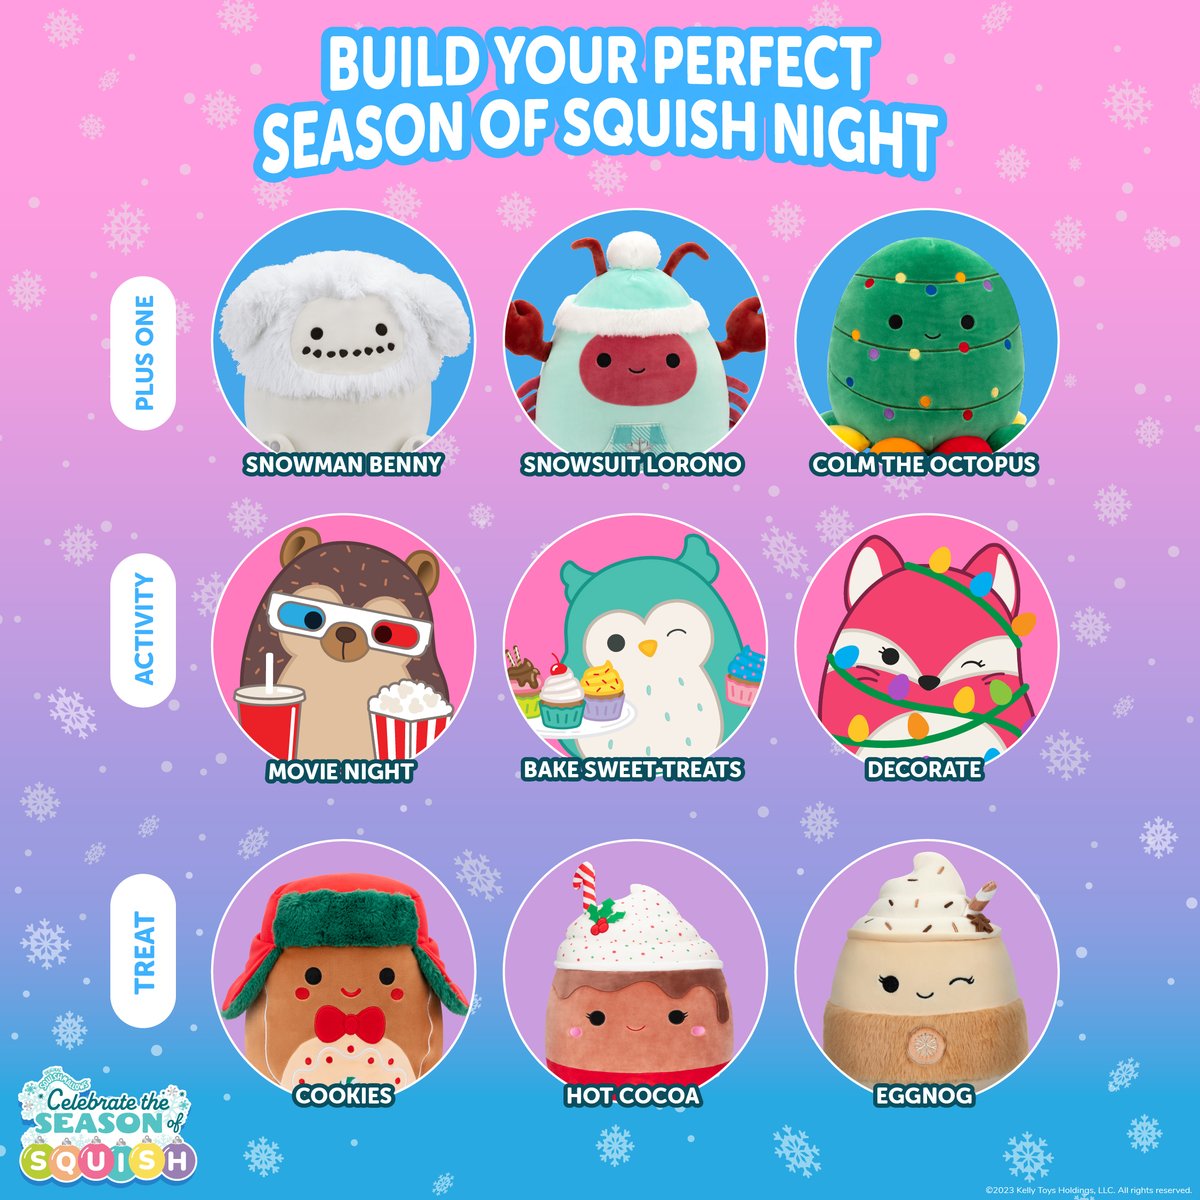 Cozy nights with #Squishmallows >>> How would you spend a perfect night in during the #SeasonOfSquish? 🥰❄️ #SquishmallowsSquad